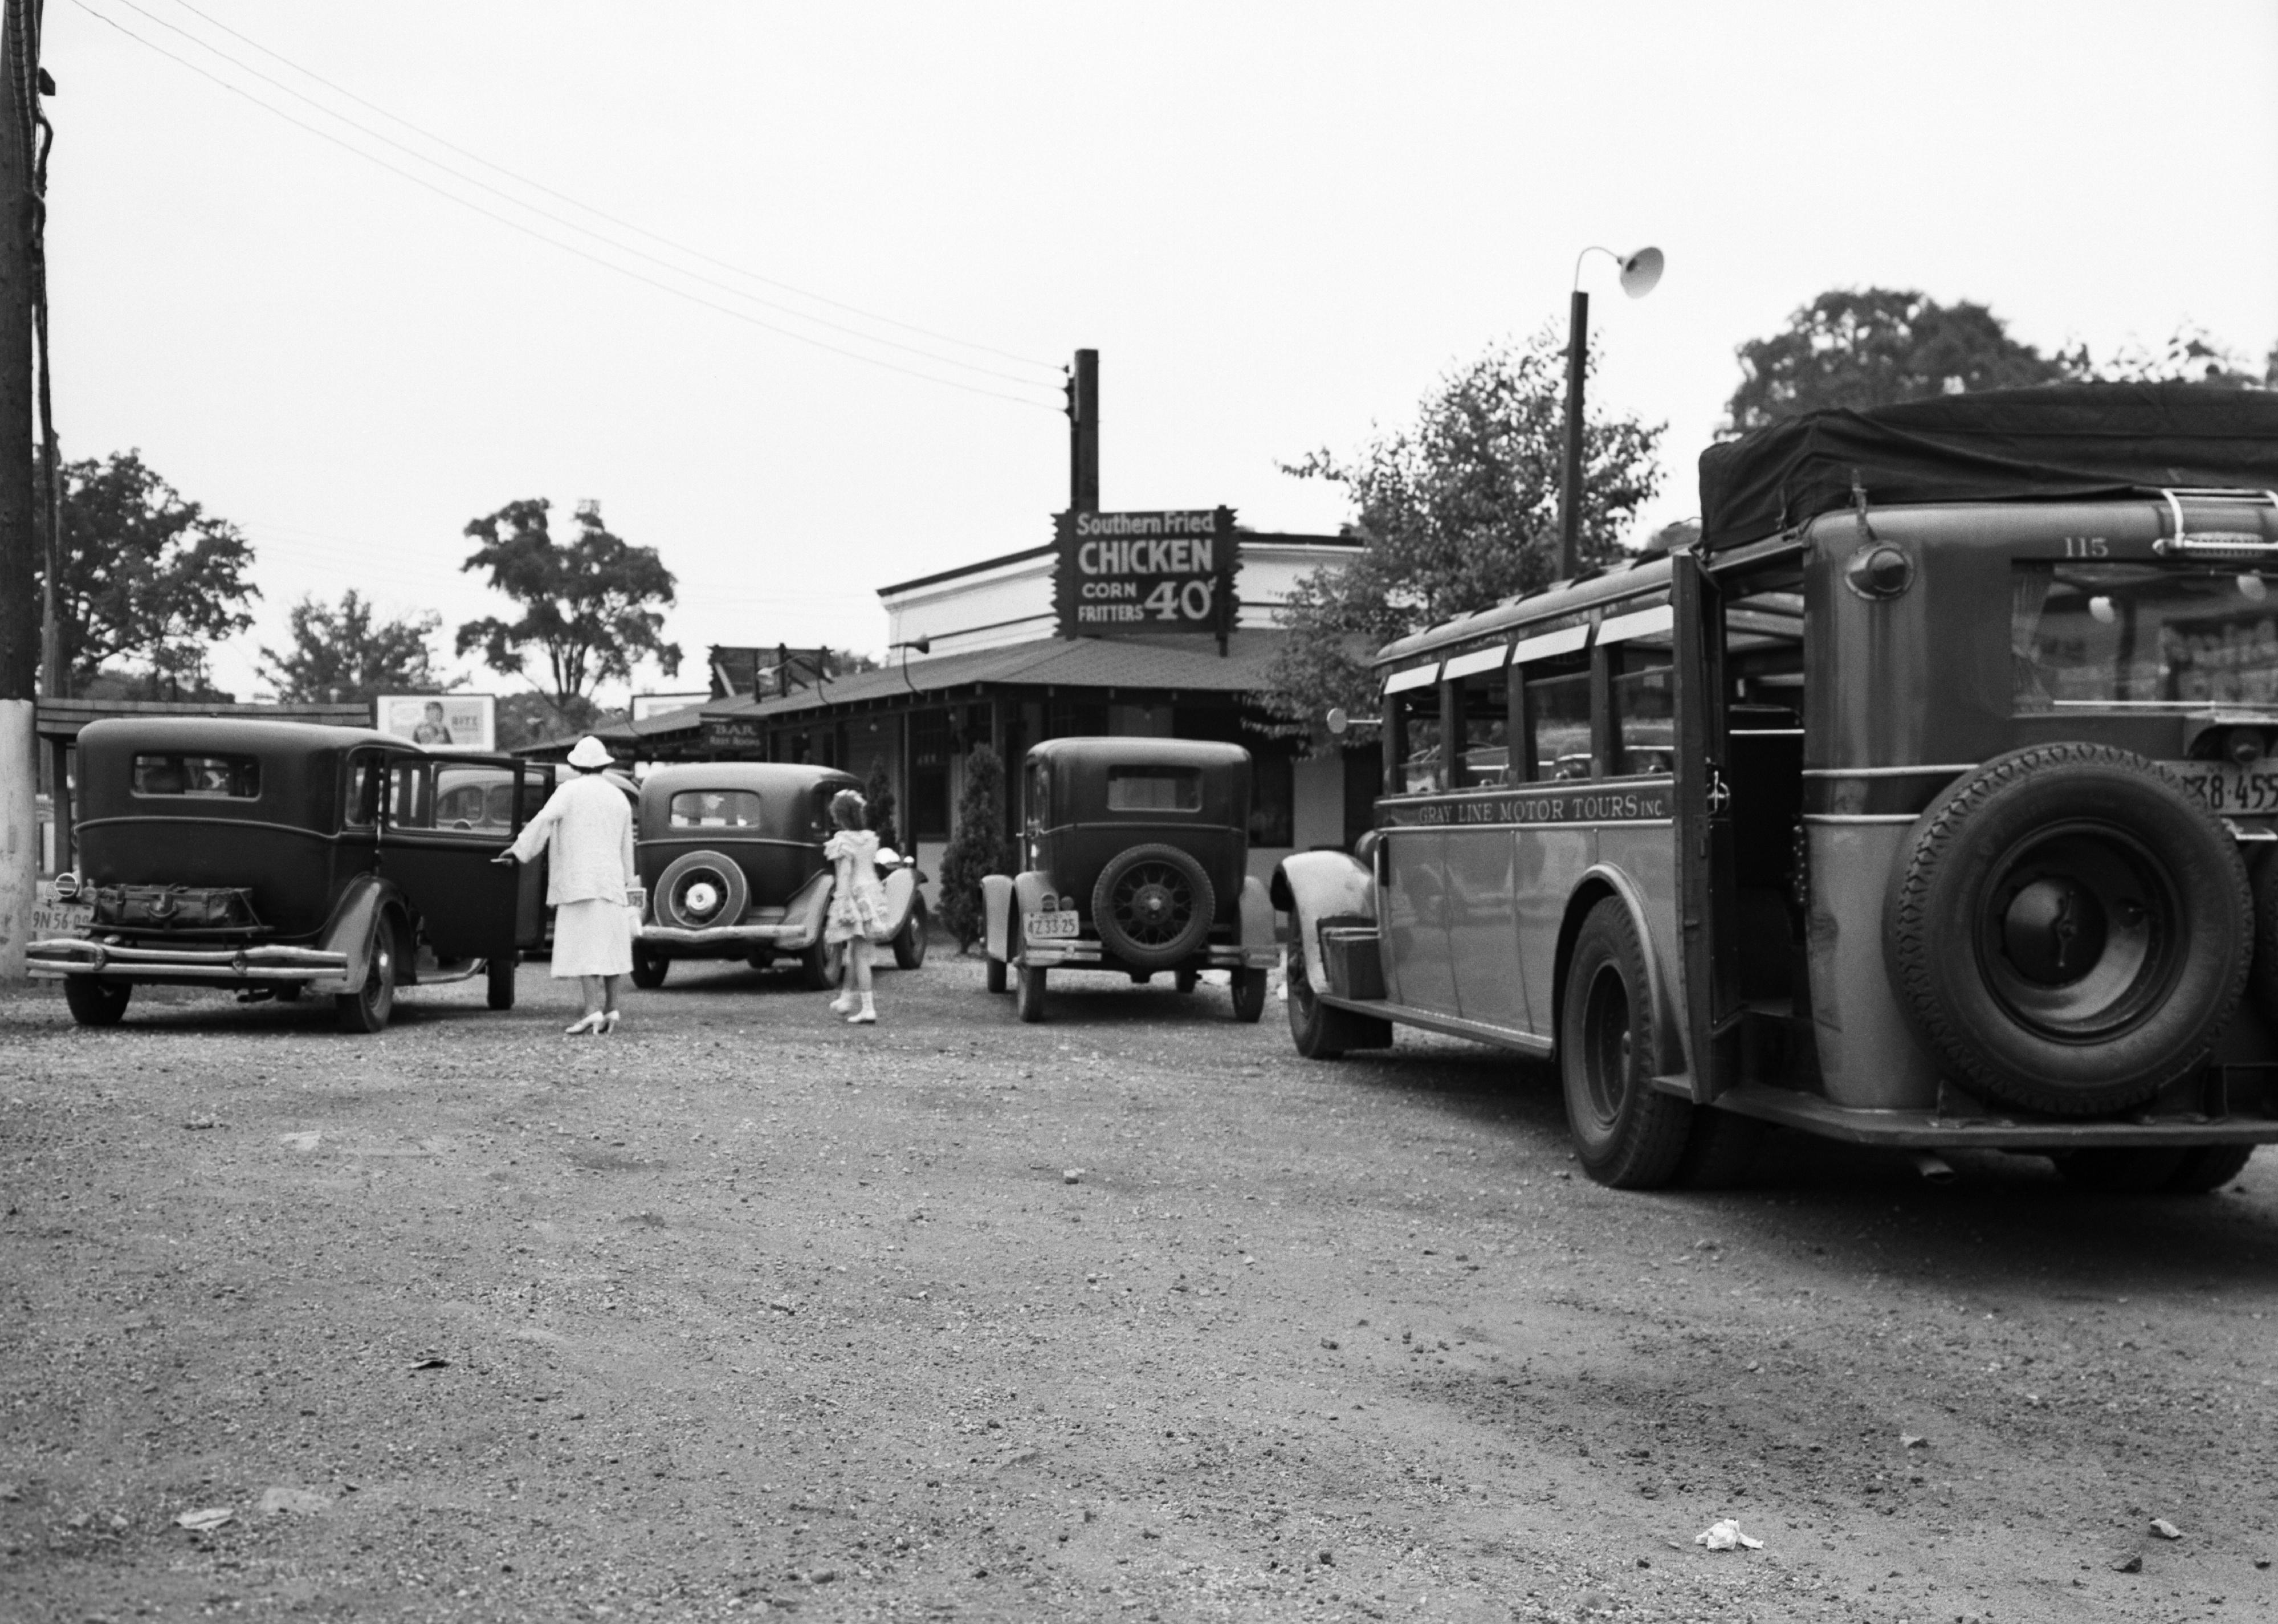 <p>While many fast food chains took off in the '50s and '60s with the development of the highway system, some chains, like White Castle, and locally owned roadside restaurants began operating in the '20s. Here, a group of travelers stops at a fast food joint selling Southern fried chicken sometime in the 1930s.</p>